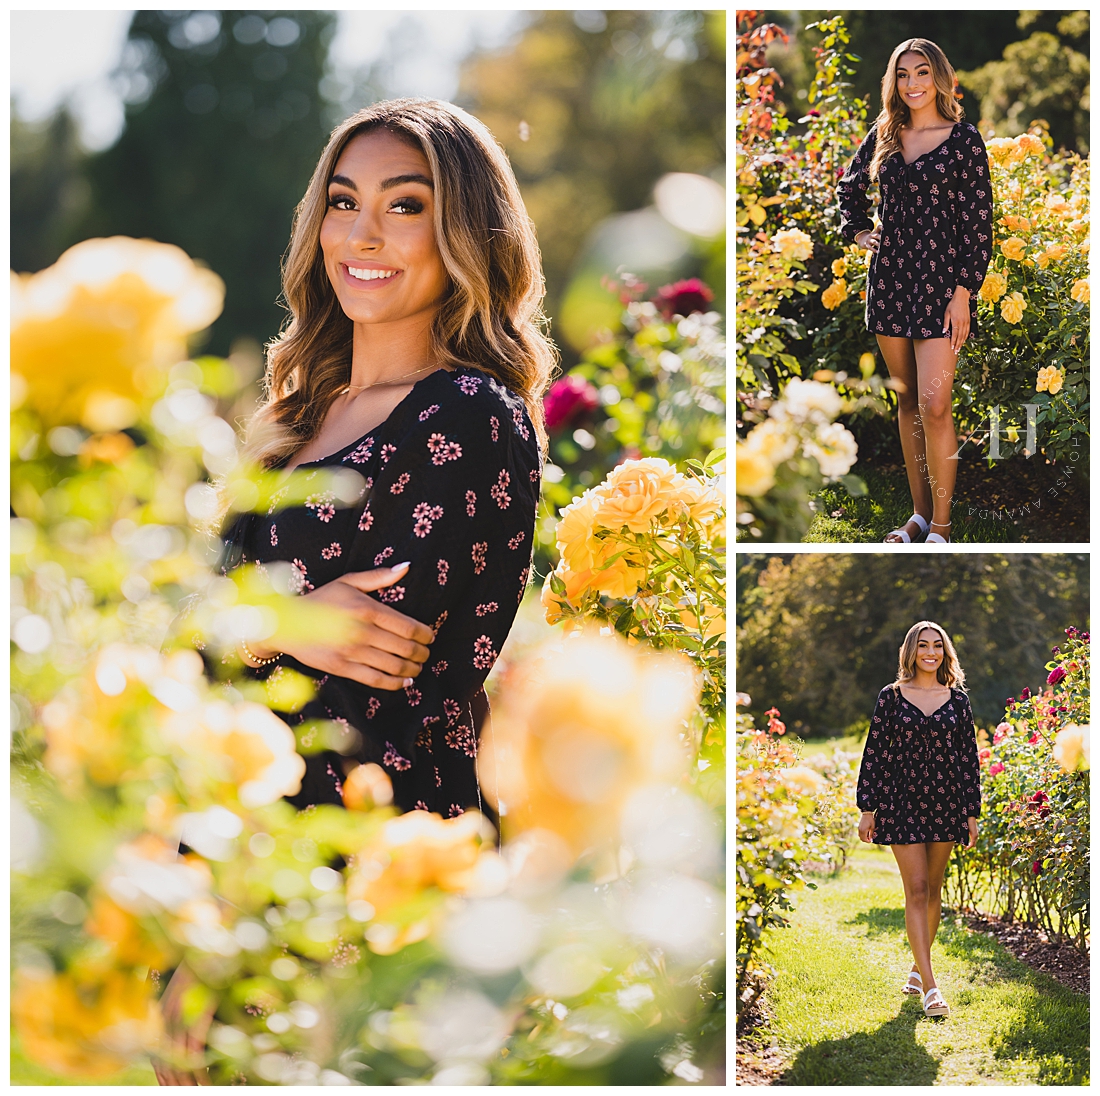 Sunlit Senior Portraits in Rose Garden | Summer Outfit Inspo, Floral Dress and Cute Sandals | Photographed by the Best Tacoma Senior Photographer Amanda Howse Photography